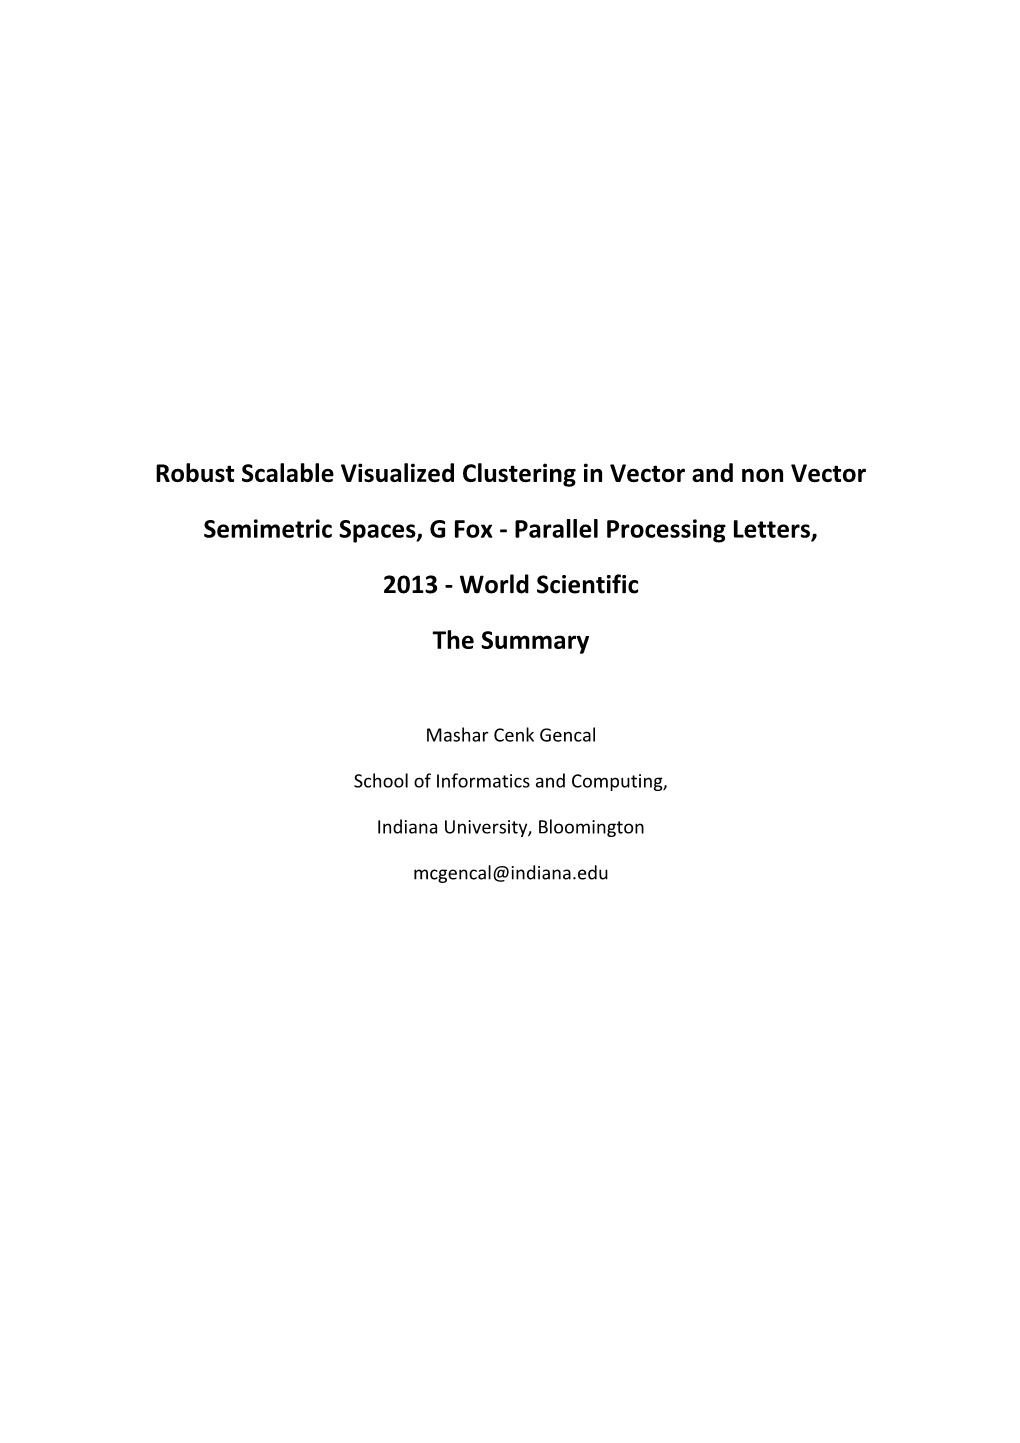 Robust Scalable Visualized Clustering in Vector and Non Vector